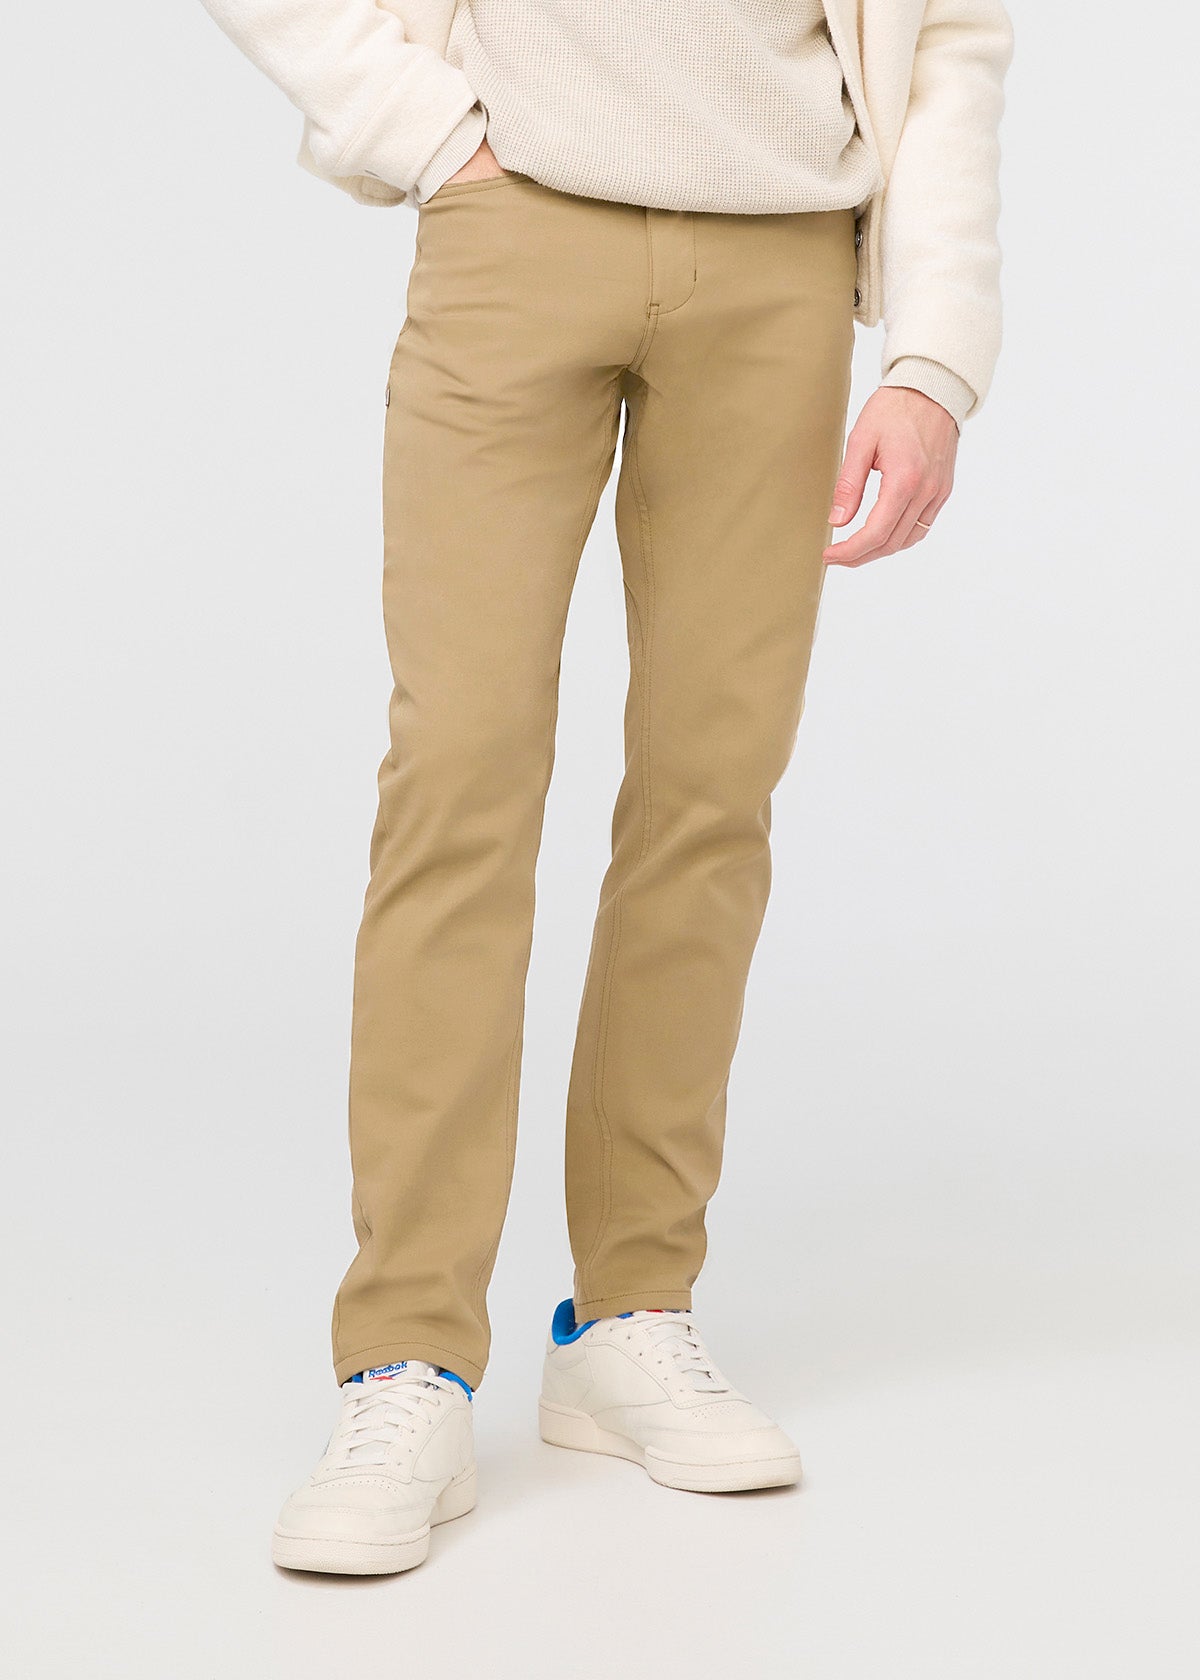 Men's khaki pants, black long sleeve top, white open shirt and black shoes  outfit | Black outfit men, Shirt outfit men, Brown pants men